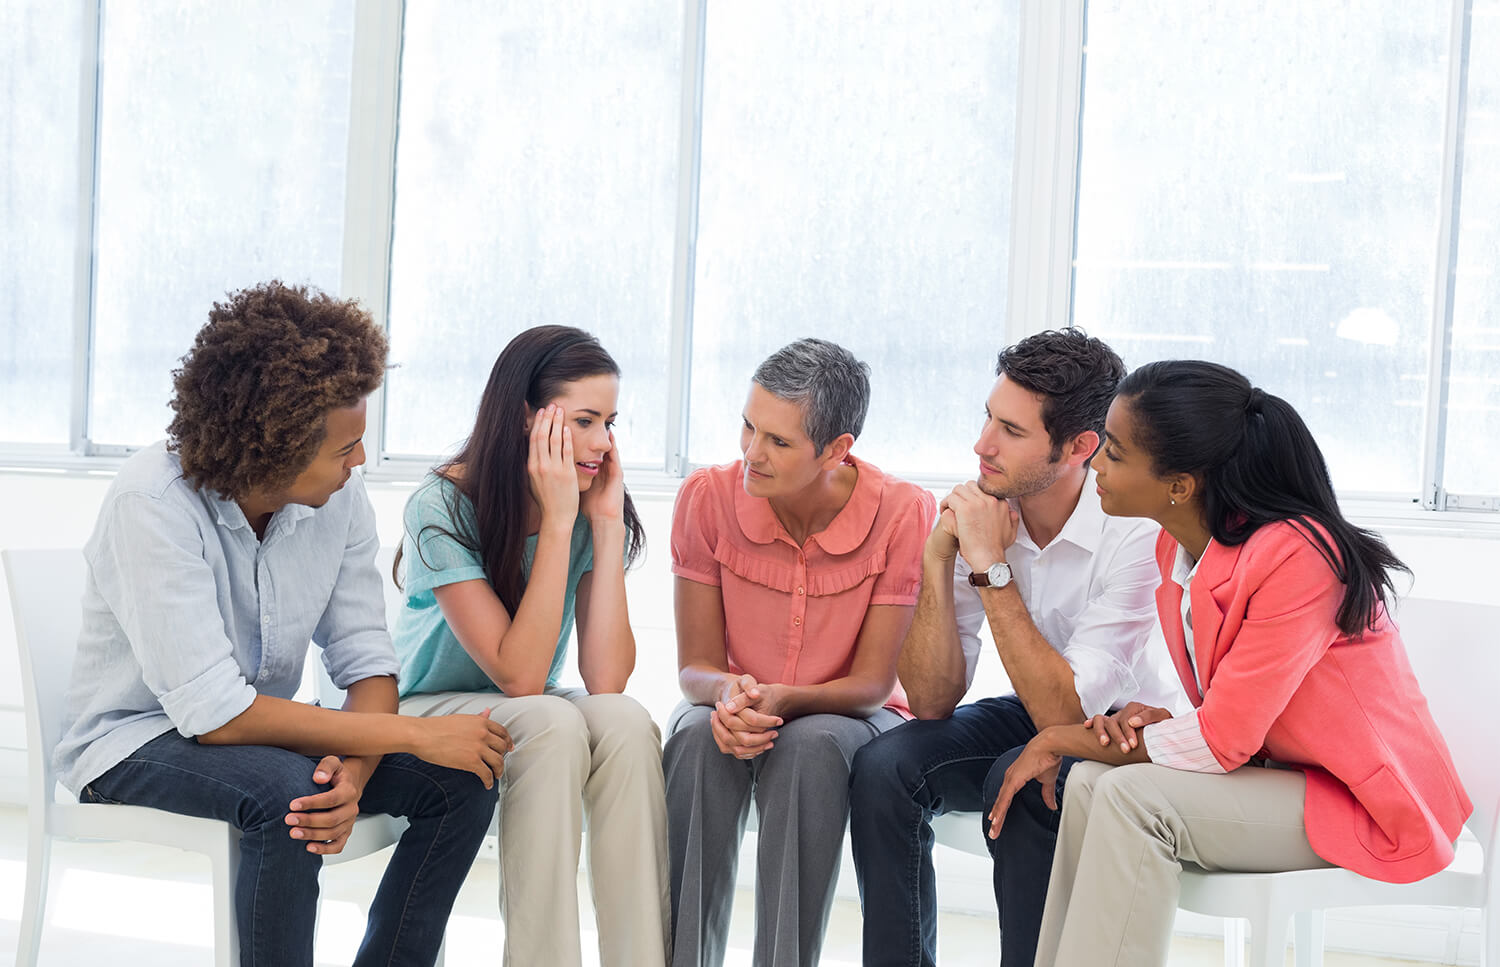 Group therapy session listening to woman tell story